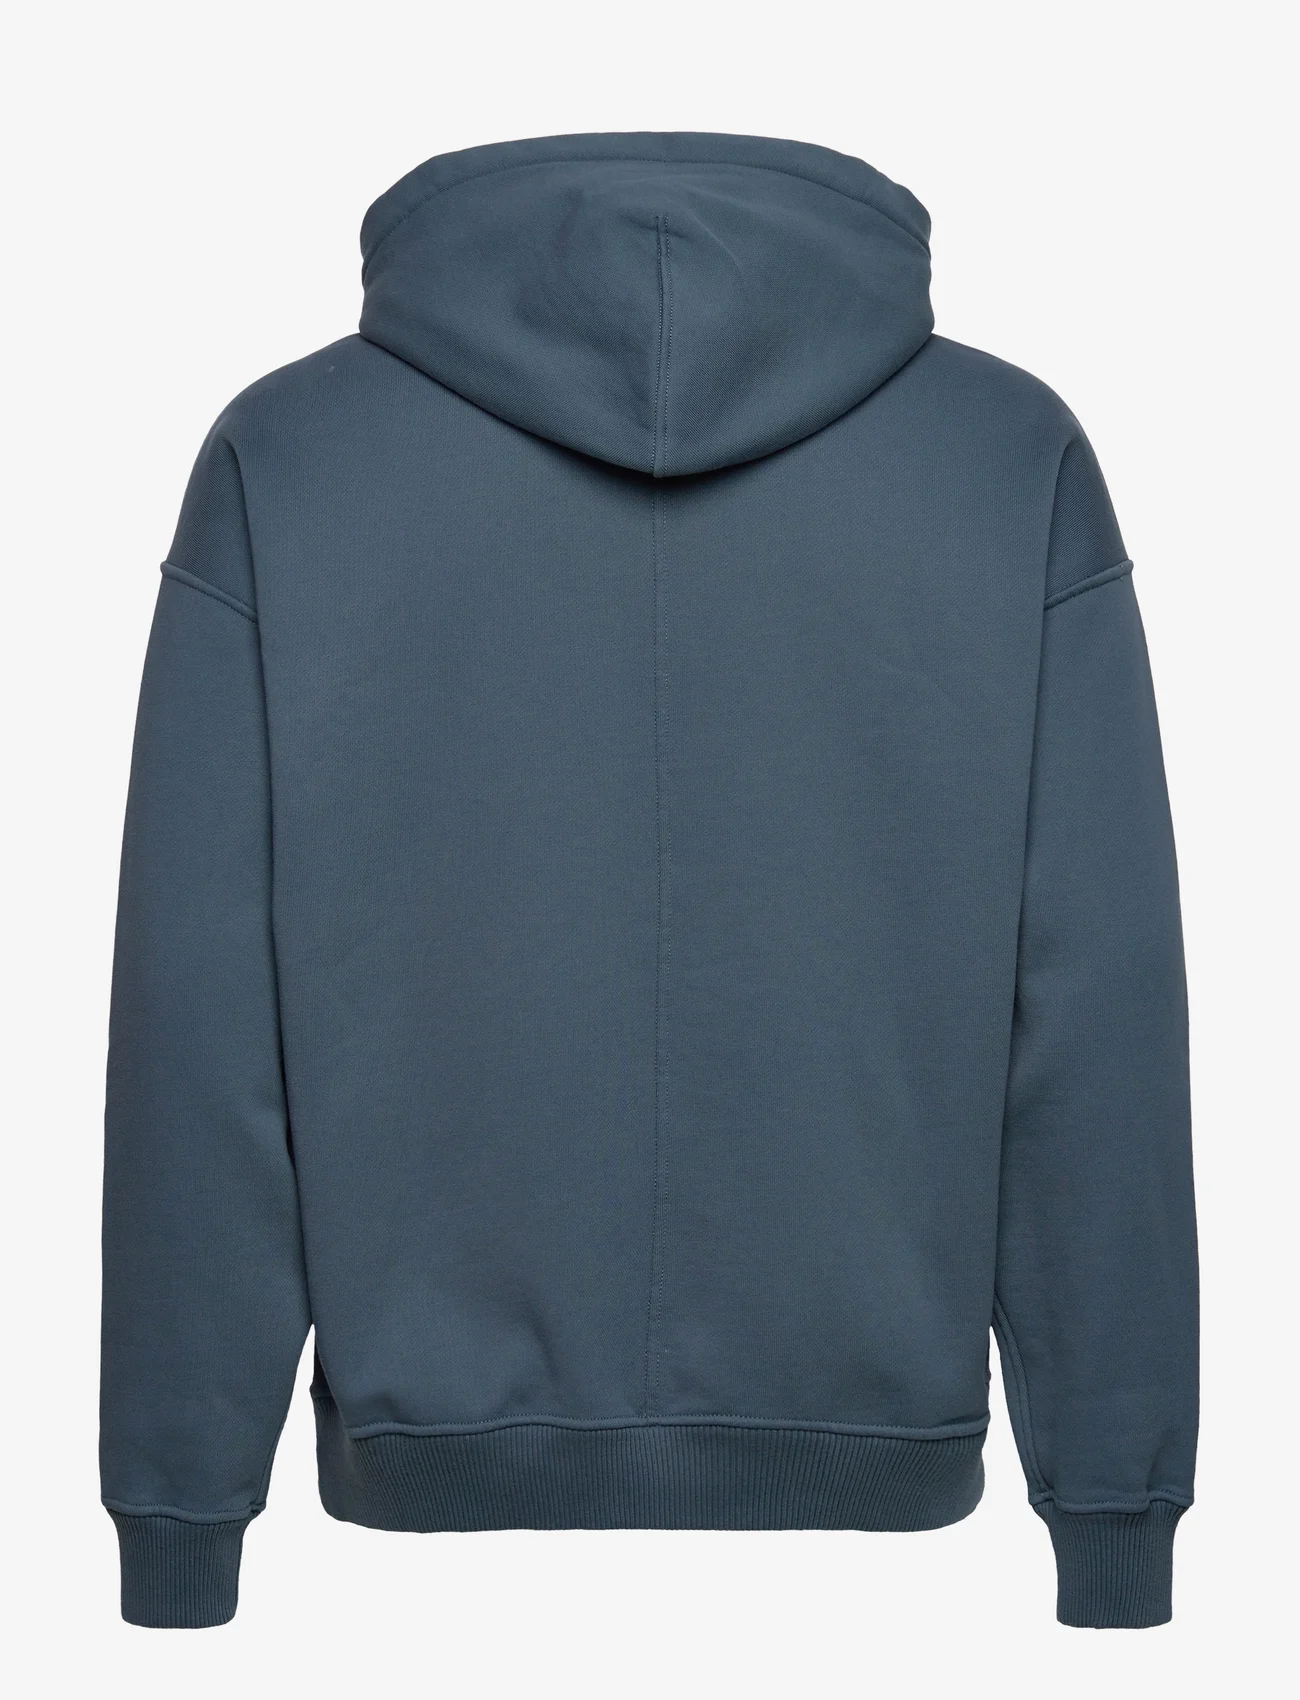 Abercrombie & Fitch - ANF MENS SWEATSHIRTS - hættetrøjer - teal - 1